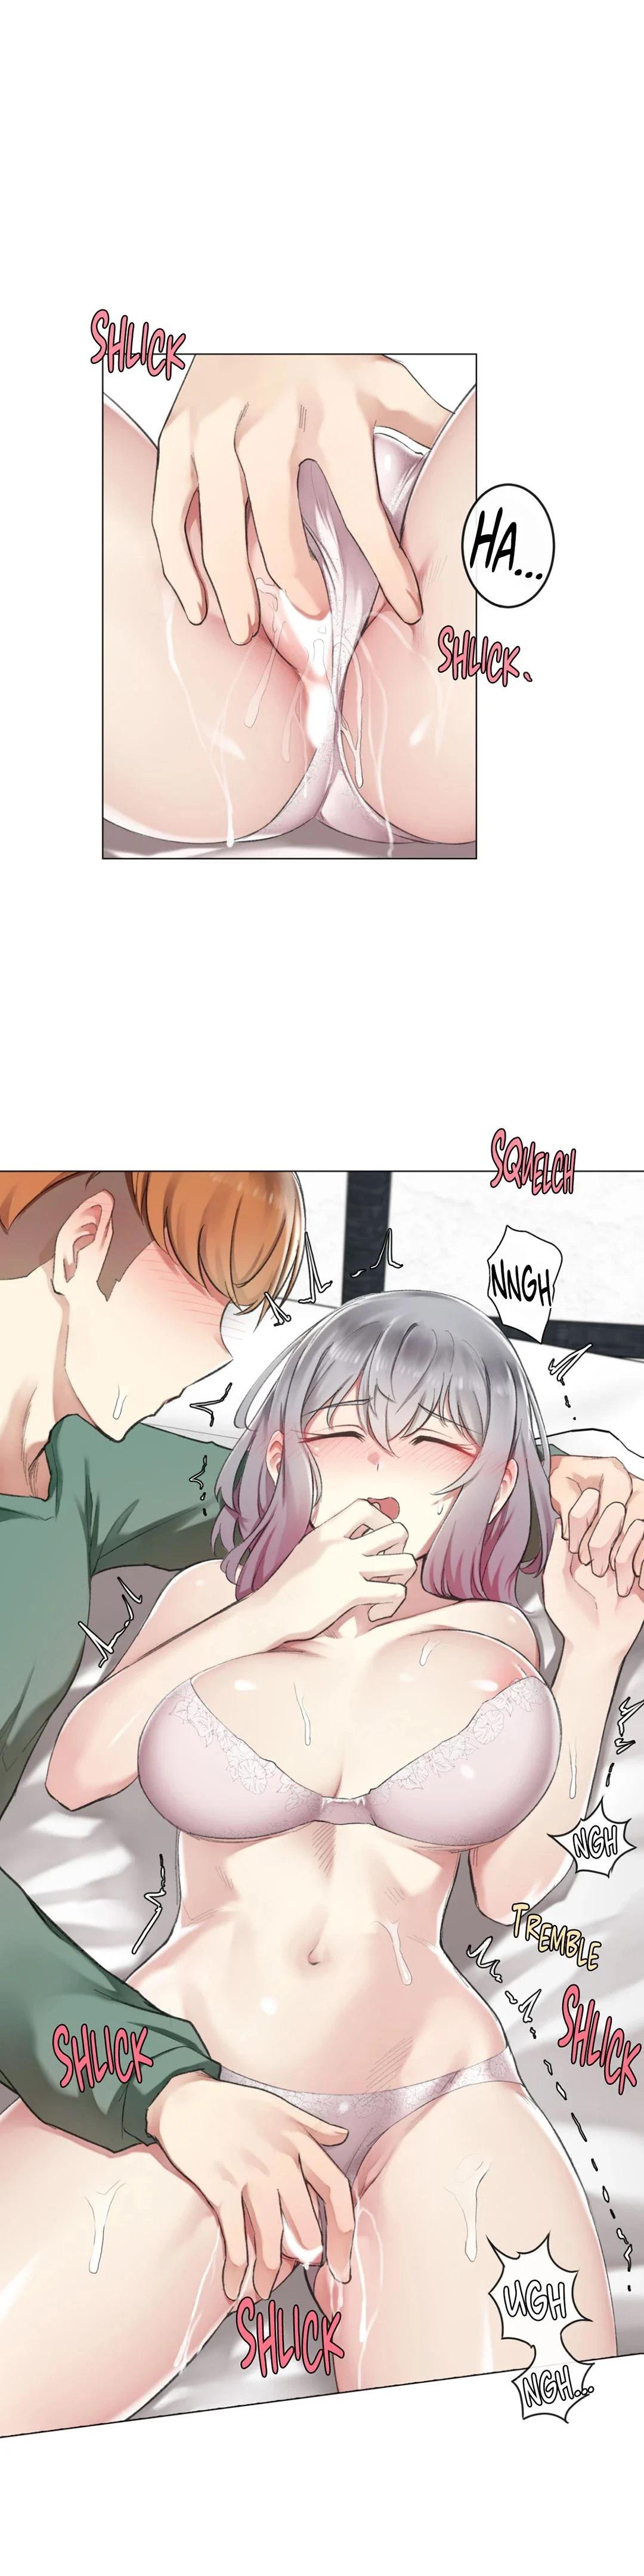 [Dumangoon, KONG_] Sexcape Room: Snap Off Ch.7/7 [English] [Manhwa PDF] Completed 83